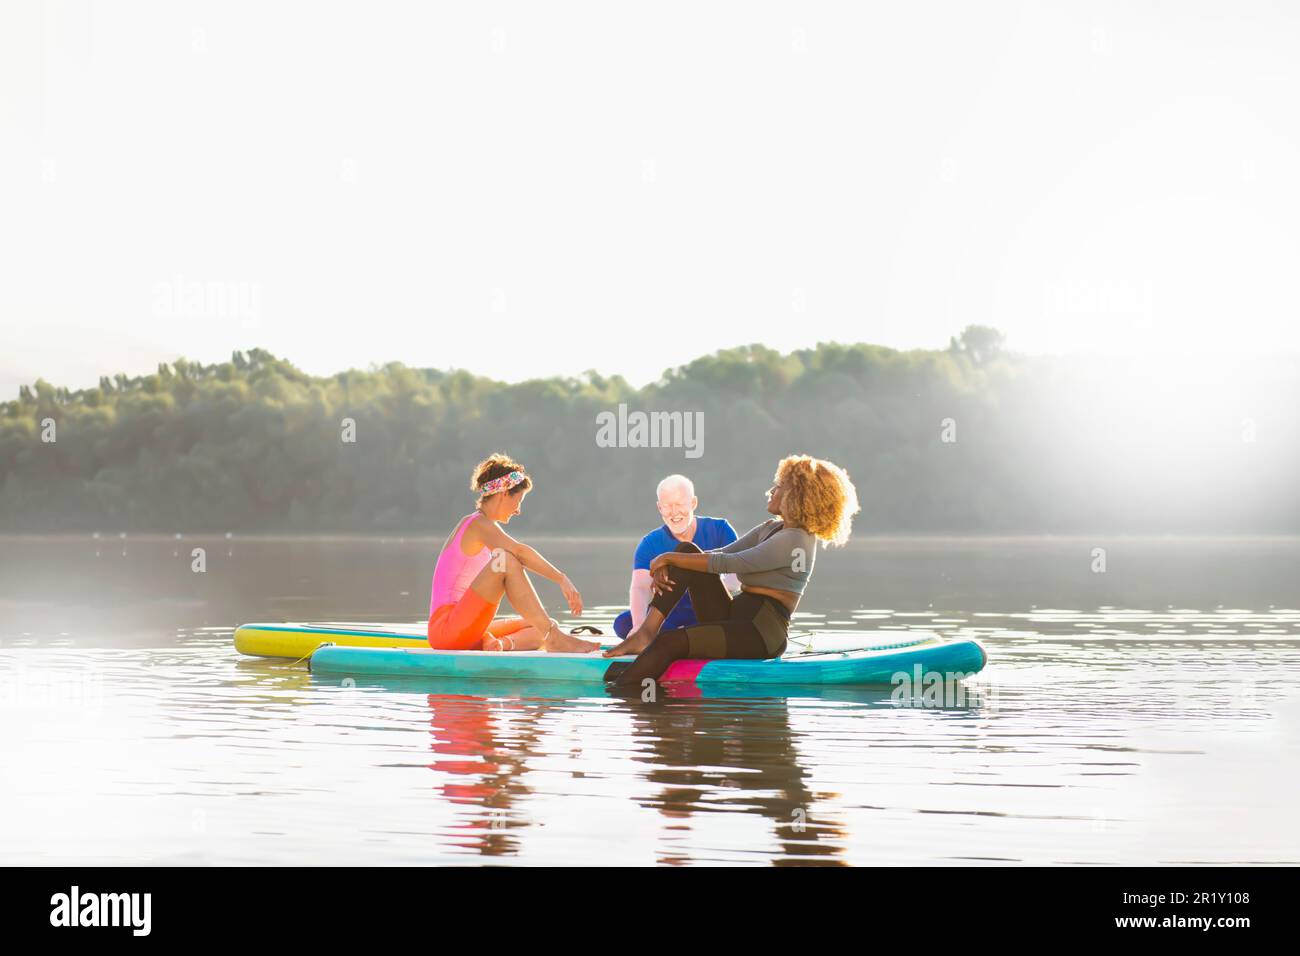 Diverse friends bonding on SUP boards: A day of relaxation and joy Stock Photo